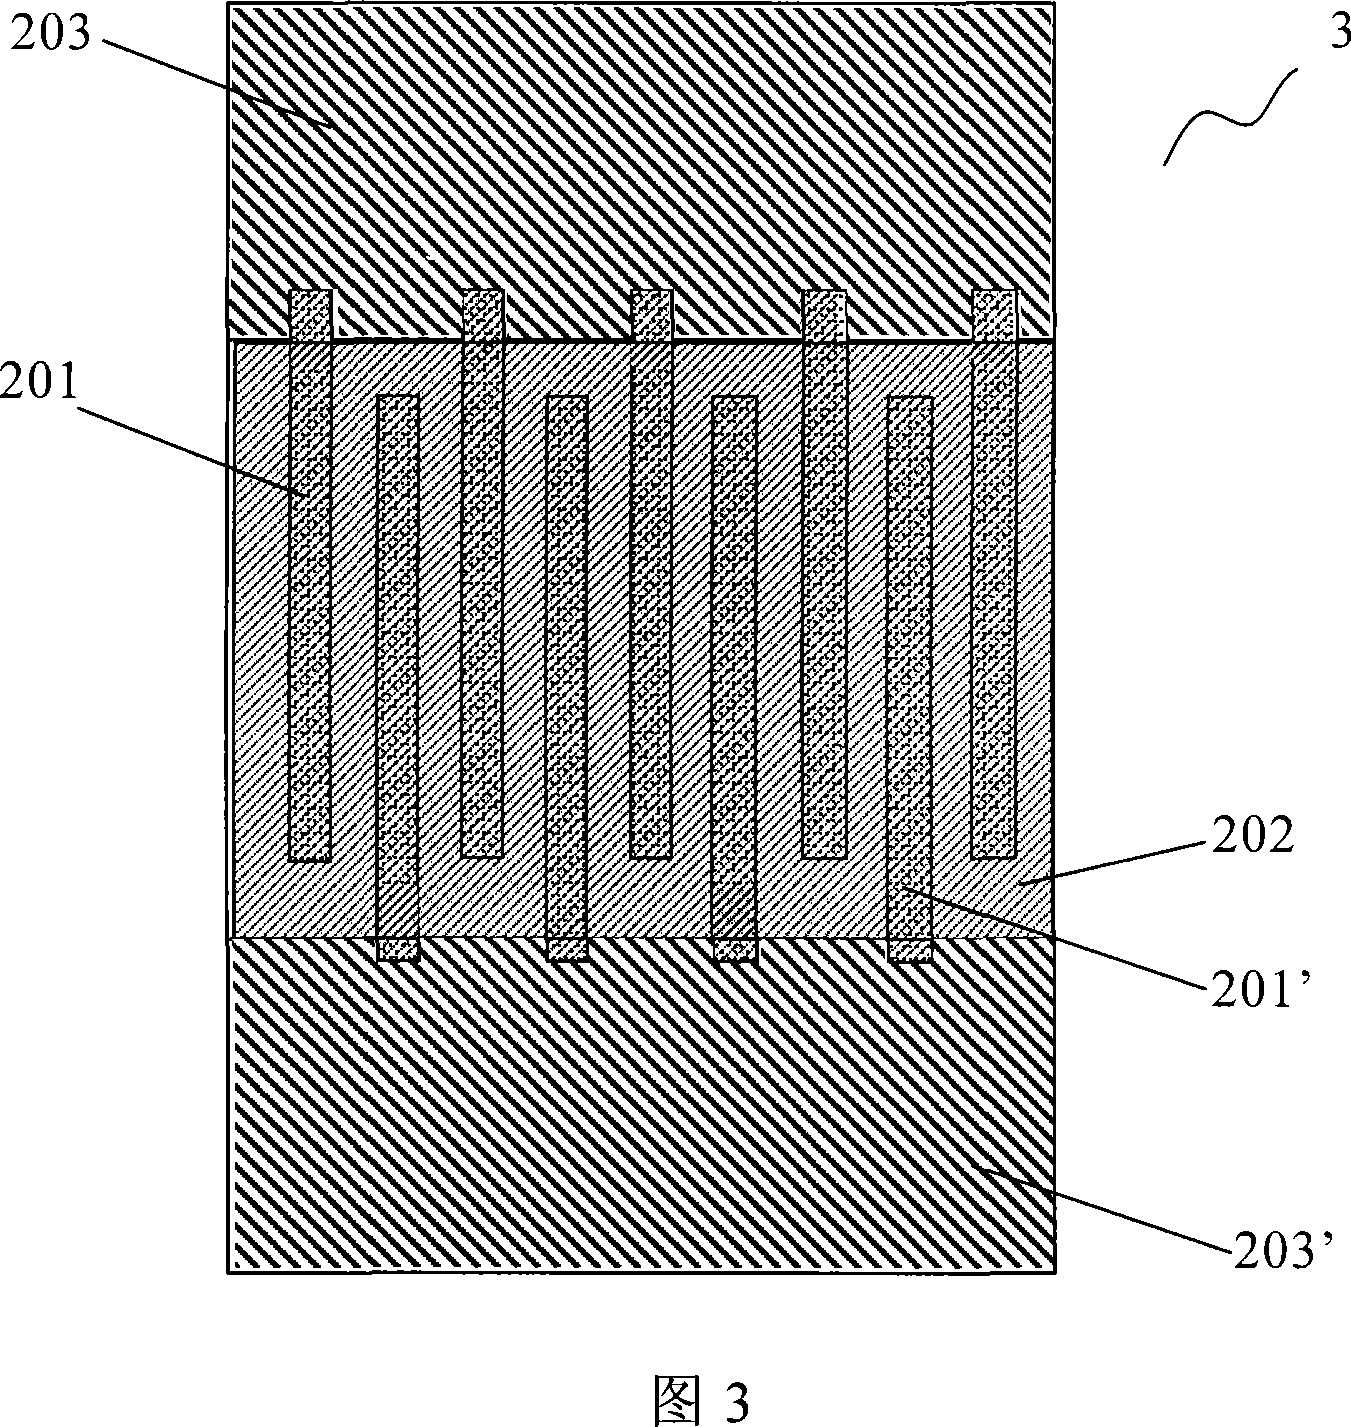 Structure for testing reliability analysis of integrated circuit inner layer dielectric